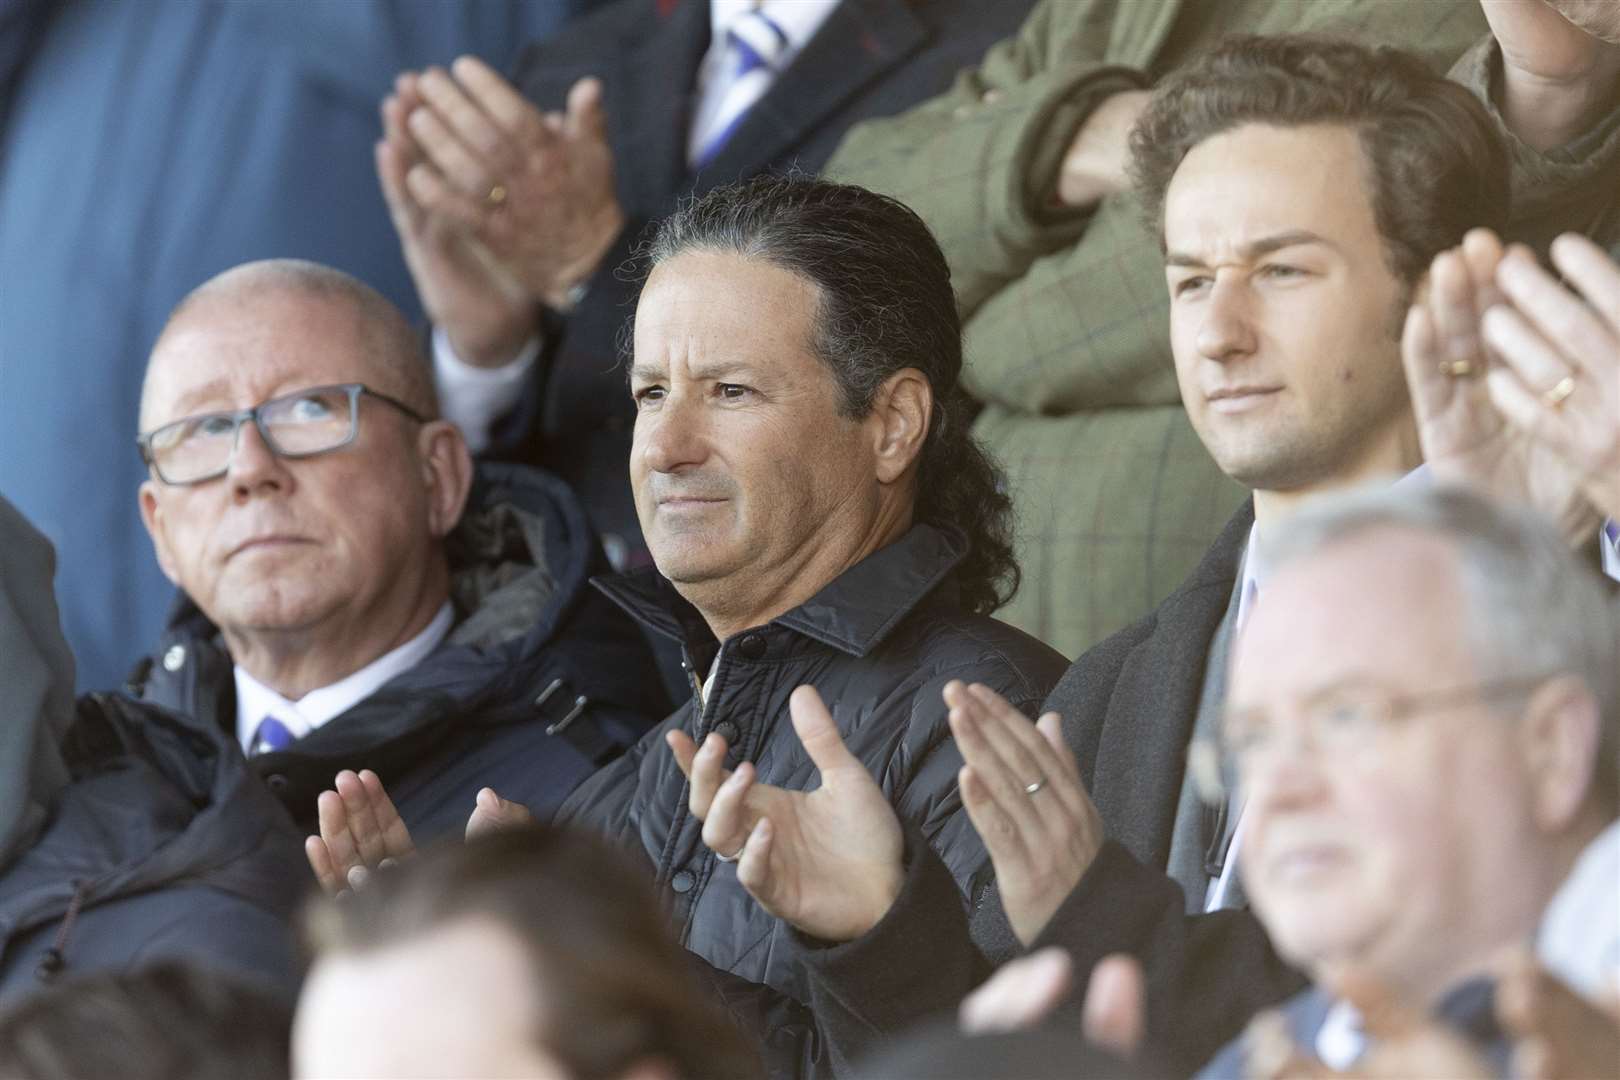 Paul Scally and Brad Galinson watch on as Gillingham lose to Stevenage